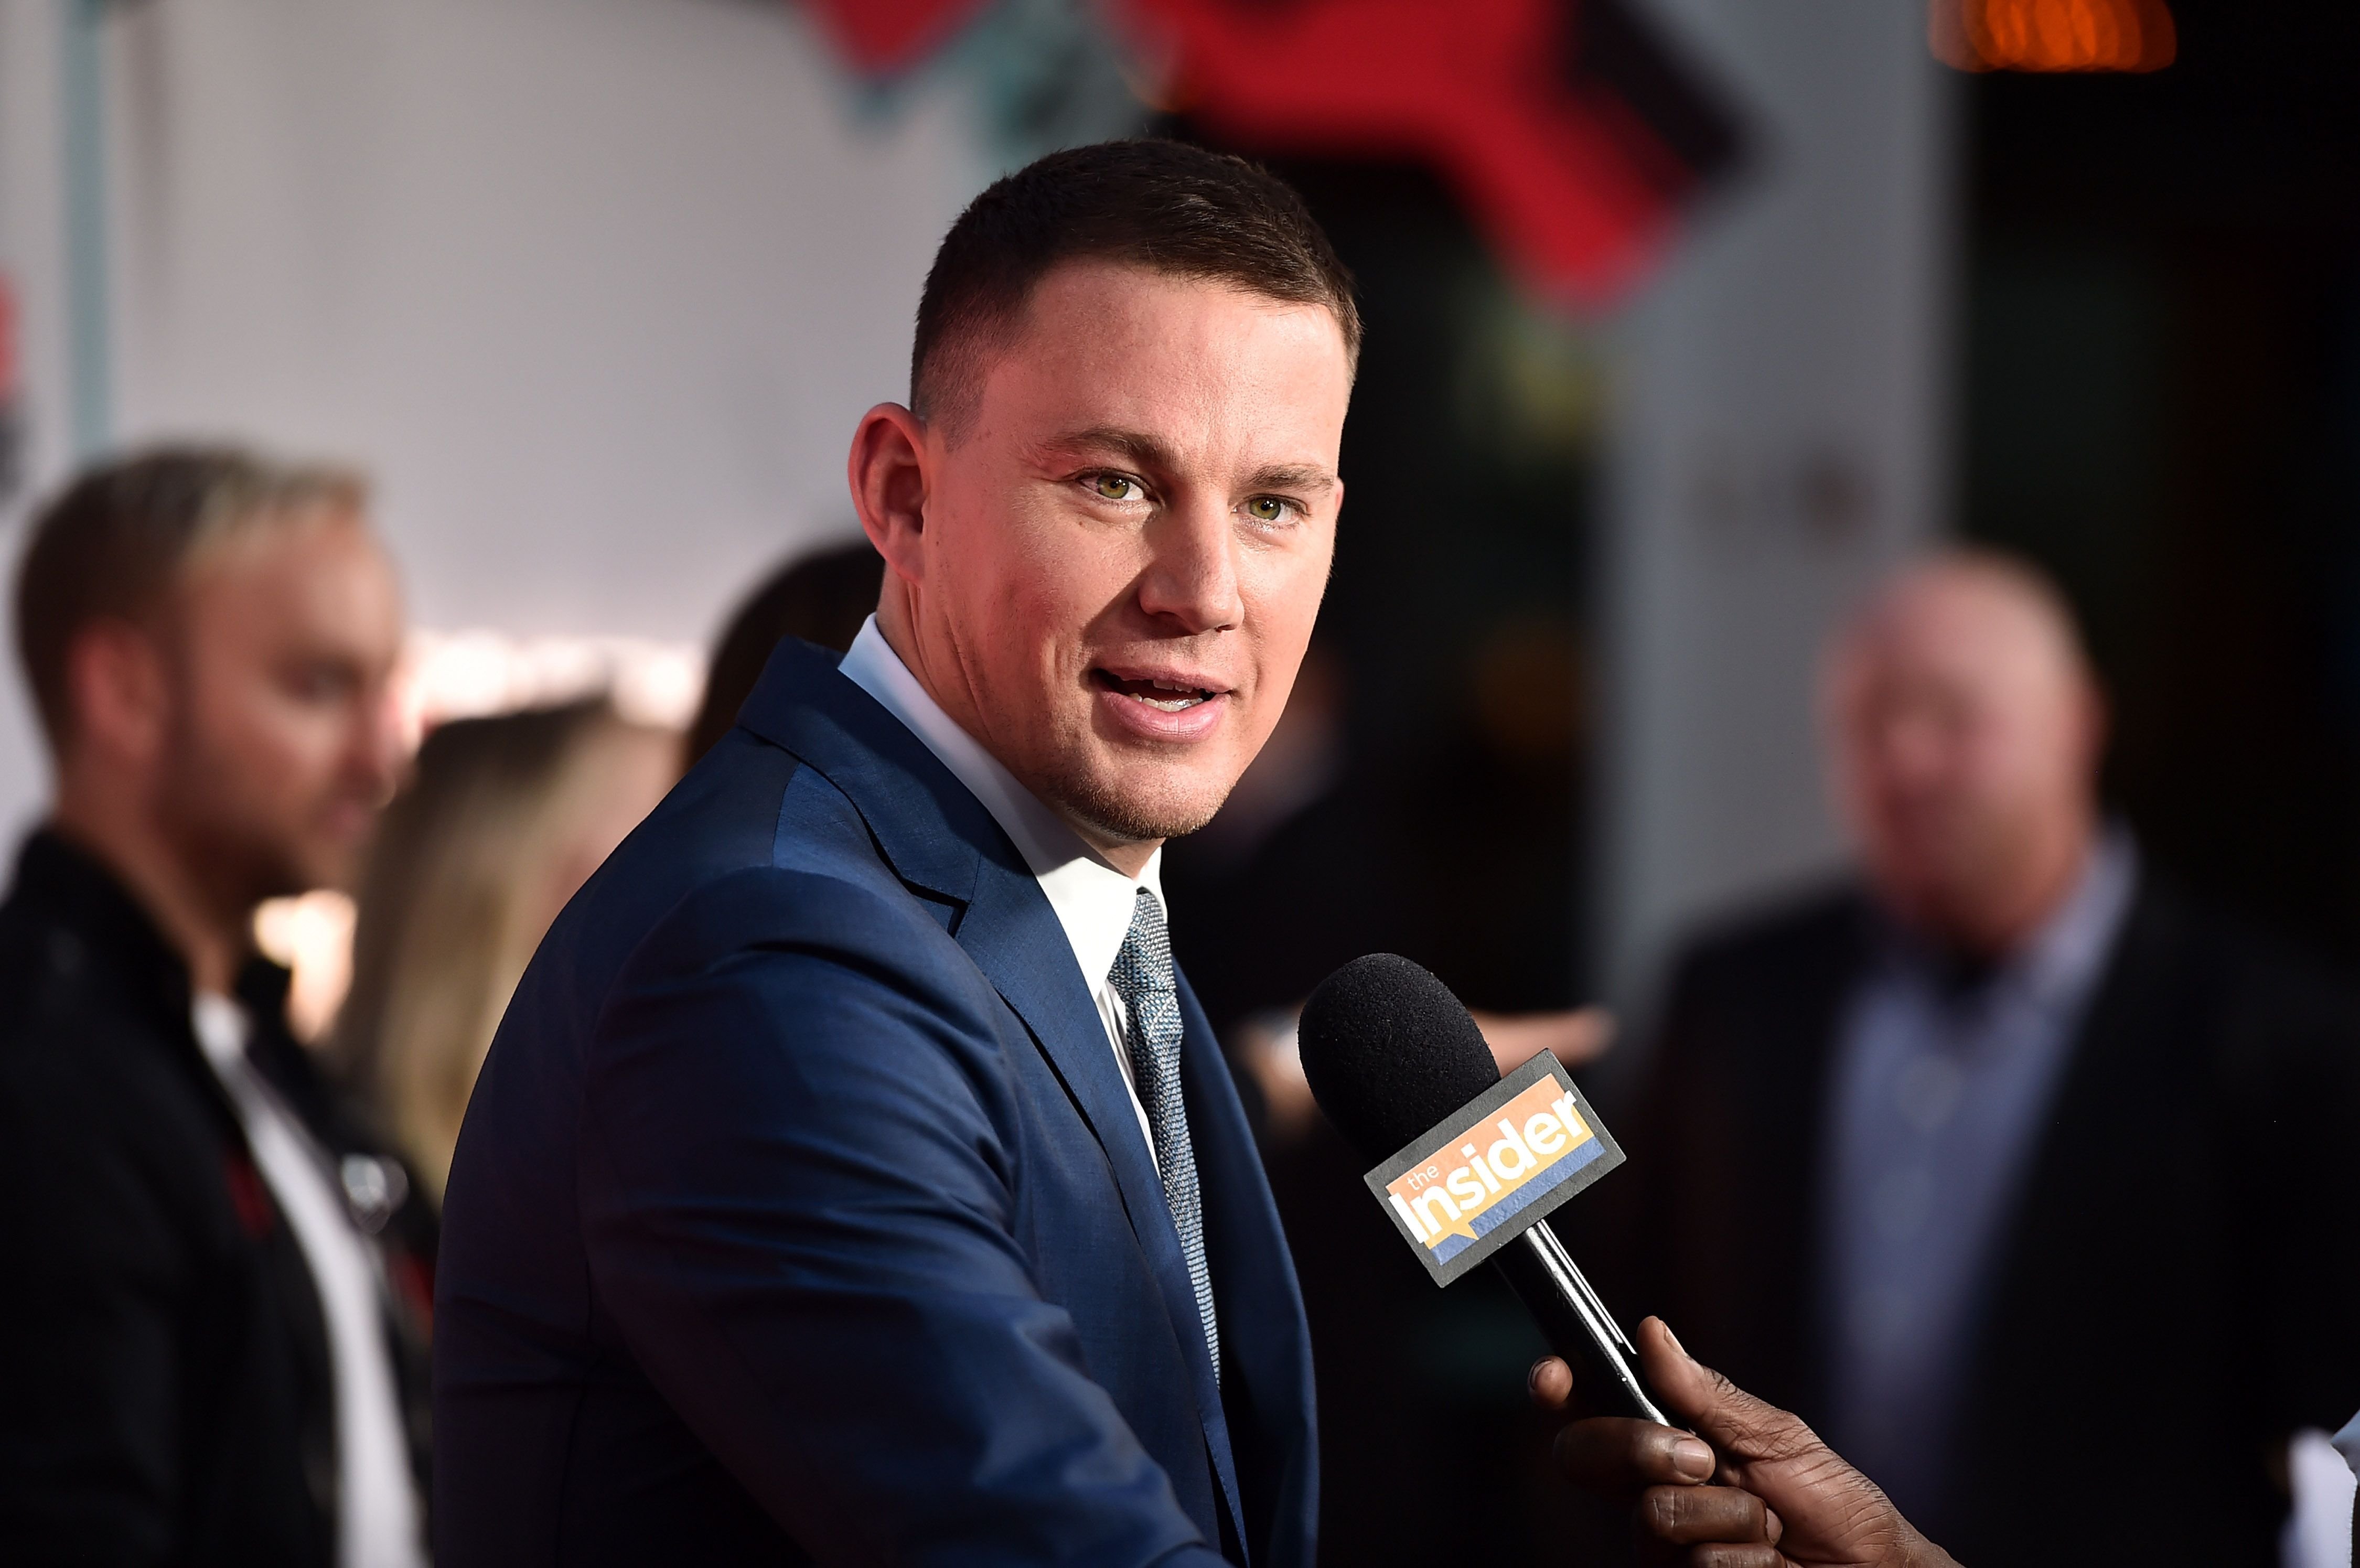 Channing Tatum attends the premiere of Amazon's "Comrade Detective" at ArcLight Hollywood in Hollywood, California | Photo: Getty Images